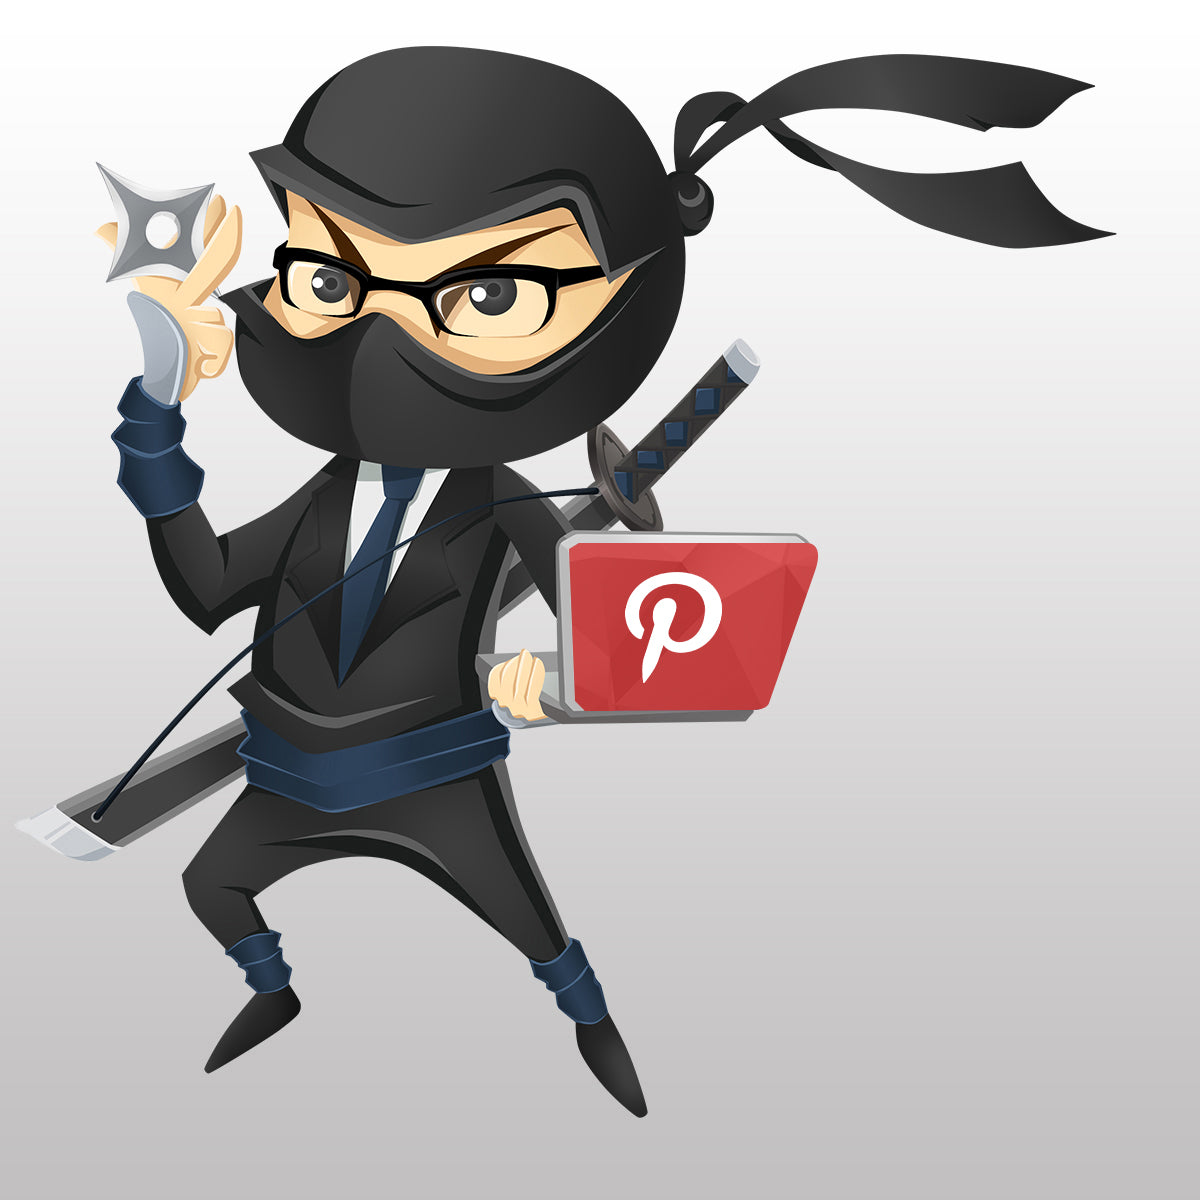 Hire Shopify Experts to integrate Pinterest Feed Ninja app into a Shopify store